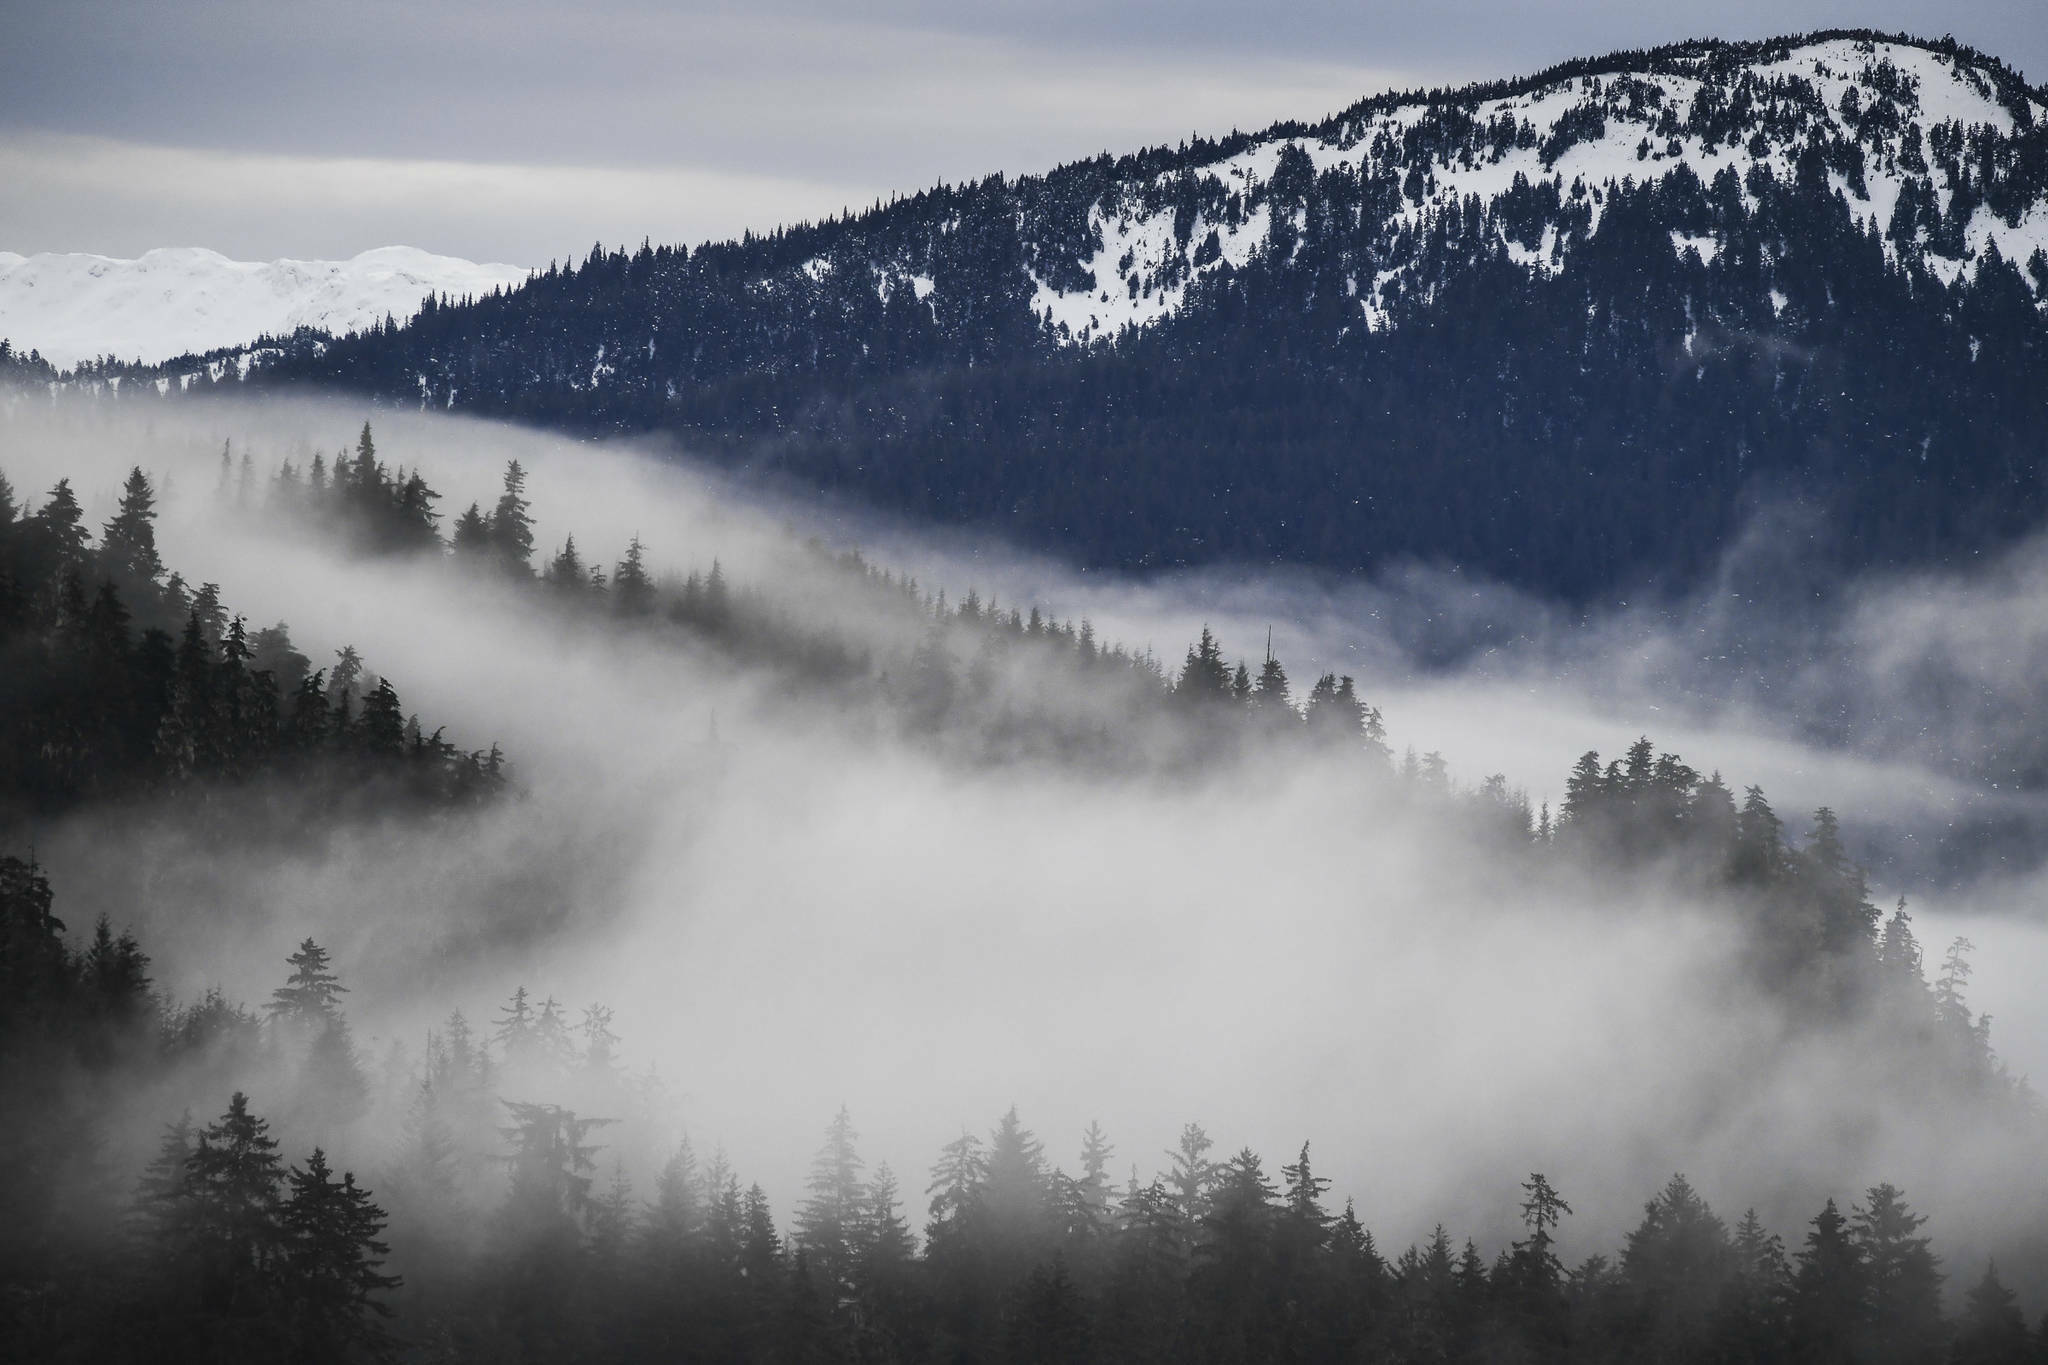 Fog drifts through the trees in the Tongass National Forest on Monday, Dec. 9, 2019. (Michael Penn | Juneau Empire File)